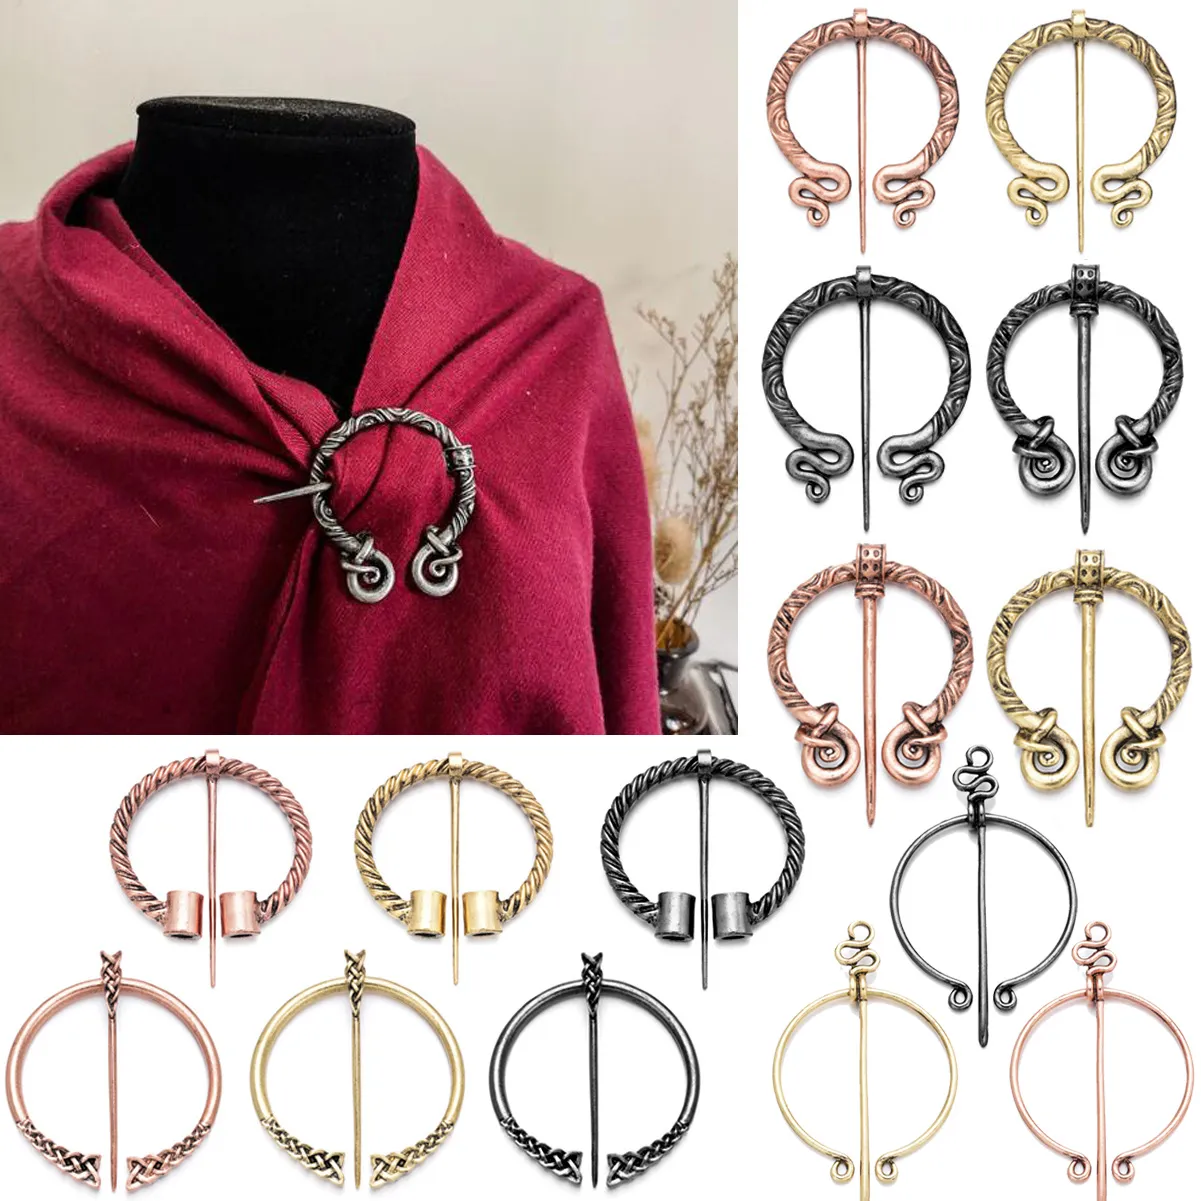 New Fashion Antique Copper Silver Vintage Womens Scarf Pin Brooch Cardigan Sweater Lapel Round Pins Brooches Clip Jewelry Gifts for Women